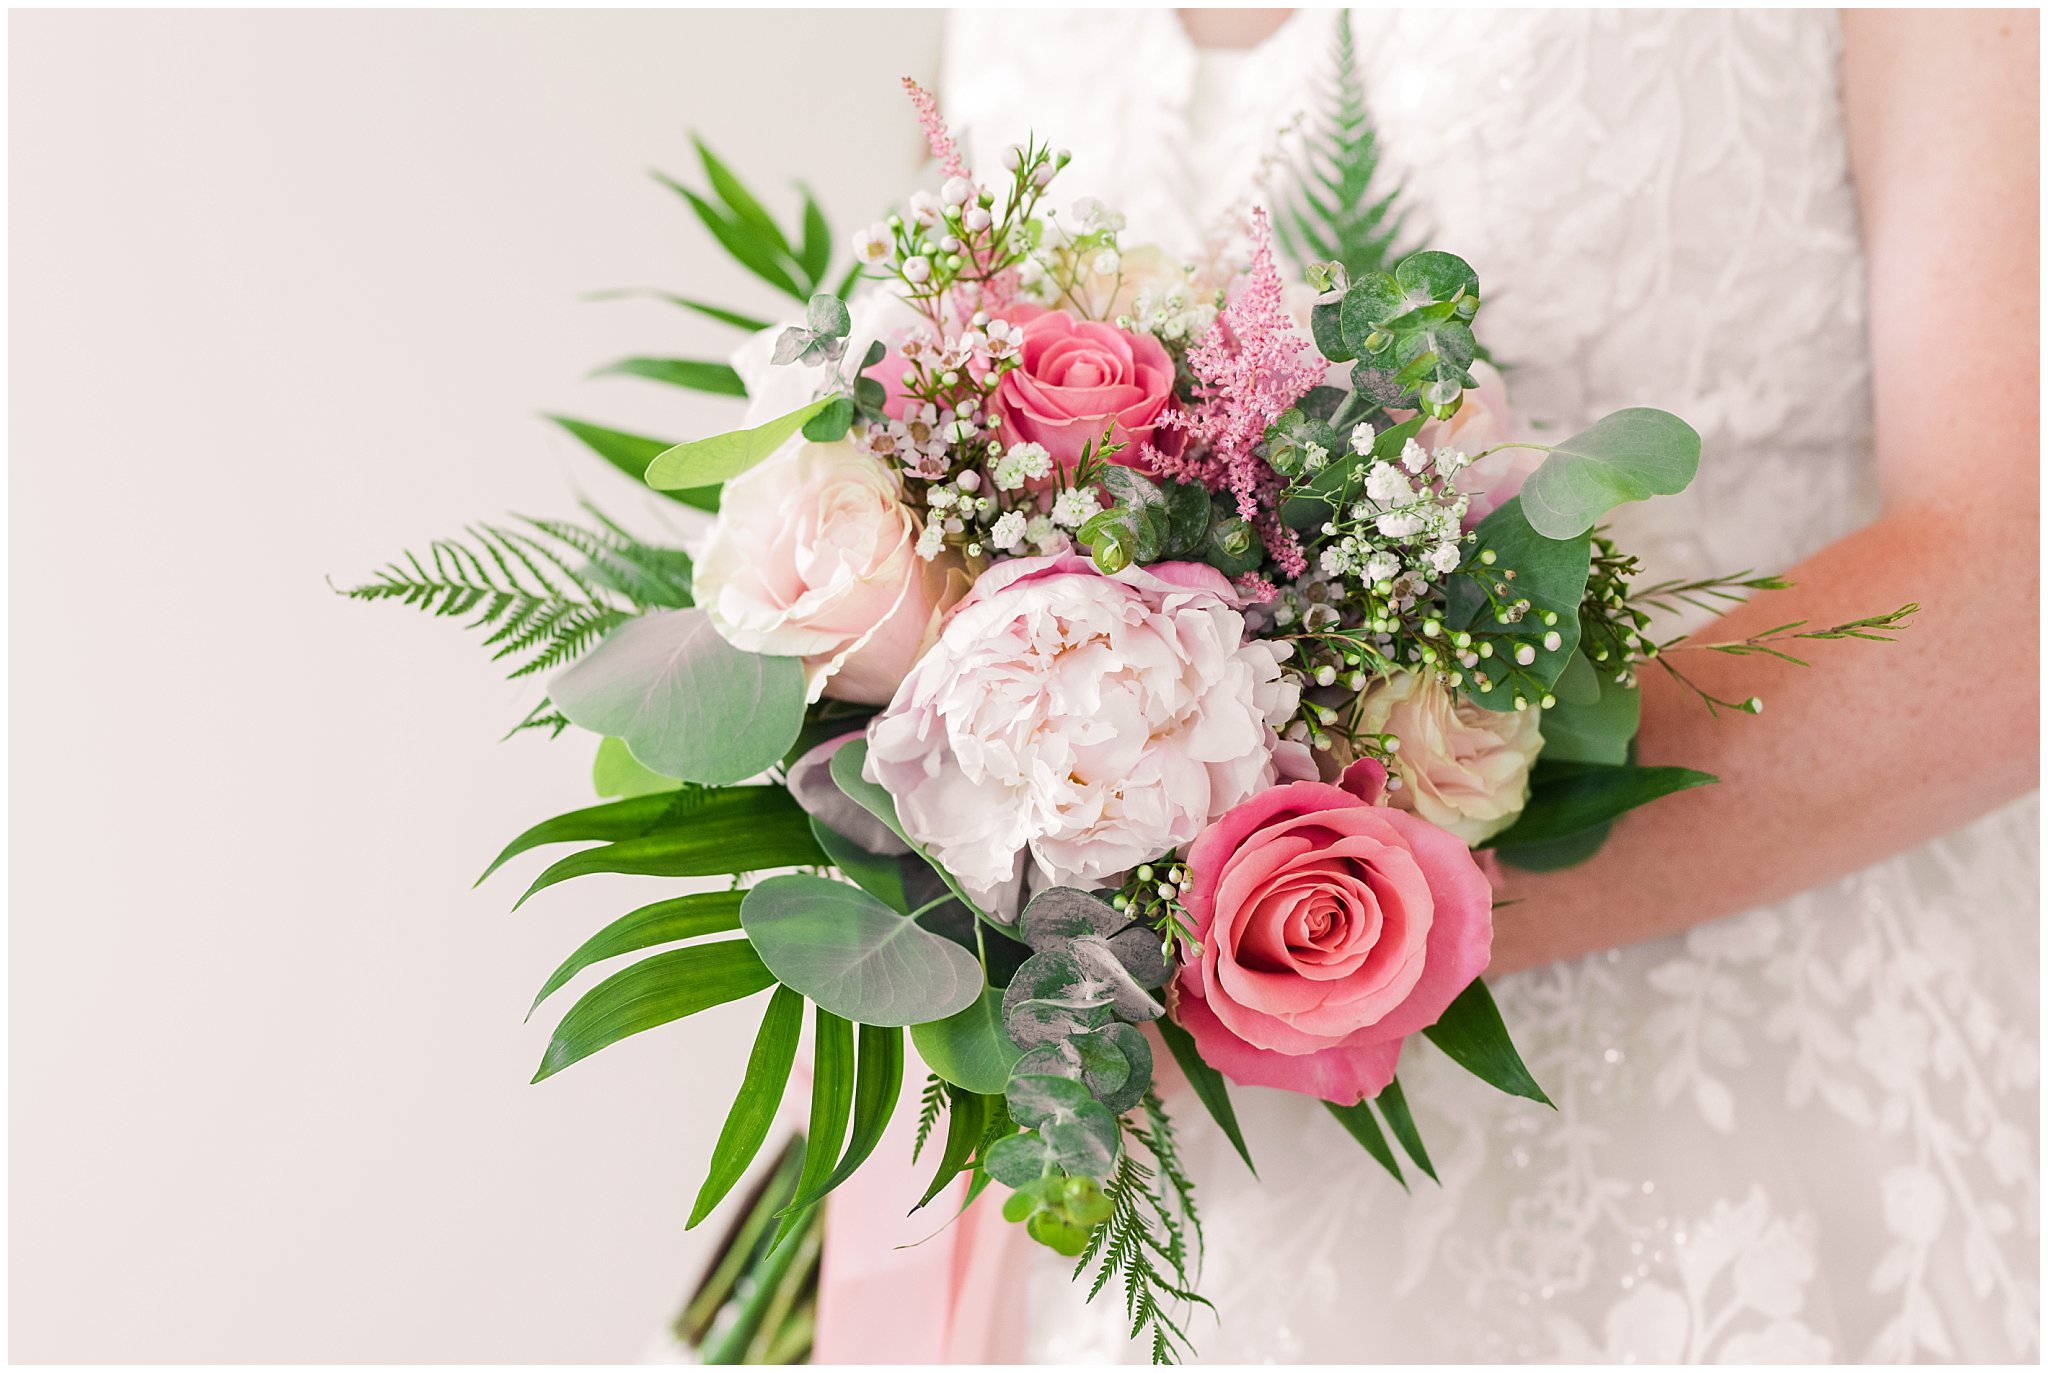 Bride with green, white and pink bouquet | Oak Hills Utah Dusty Rose and Gray Summer Wedding | Jessie and Dallin Photography